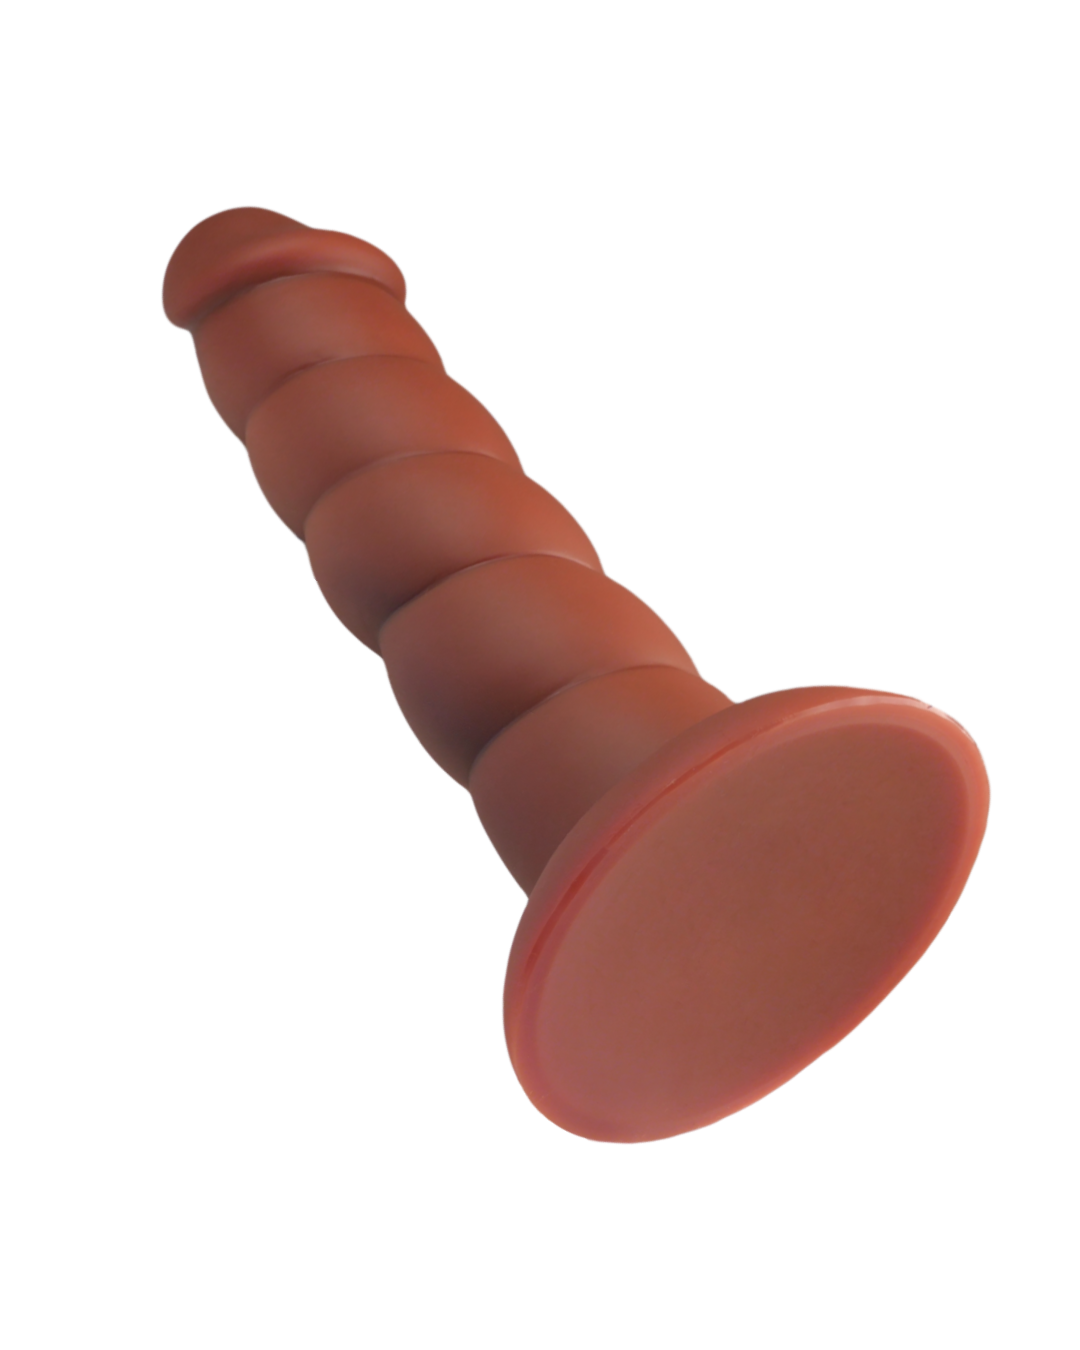 Suga Daddy 8 Inch Swirled Chocolate Silicone Dildo close up of suction cup